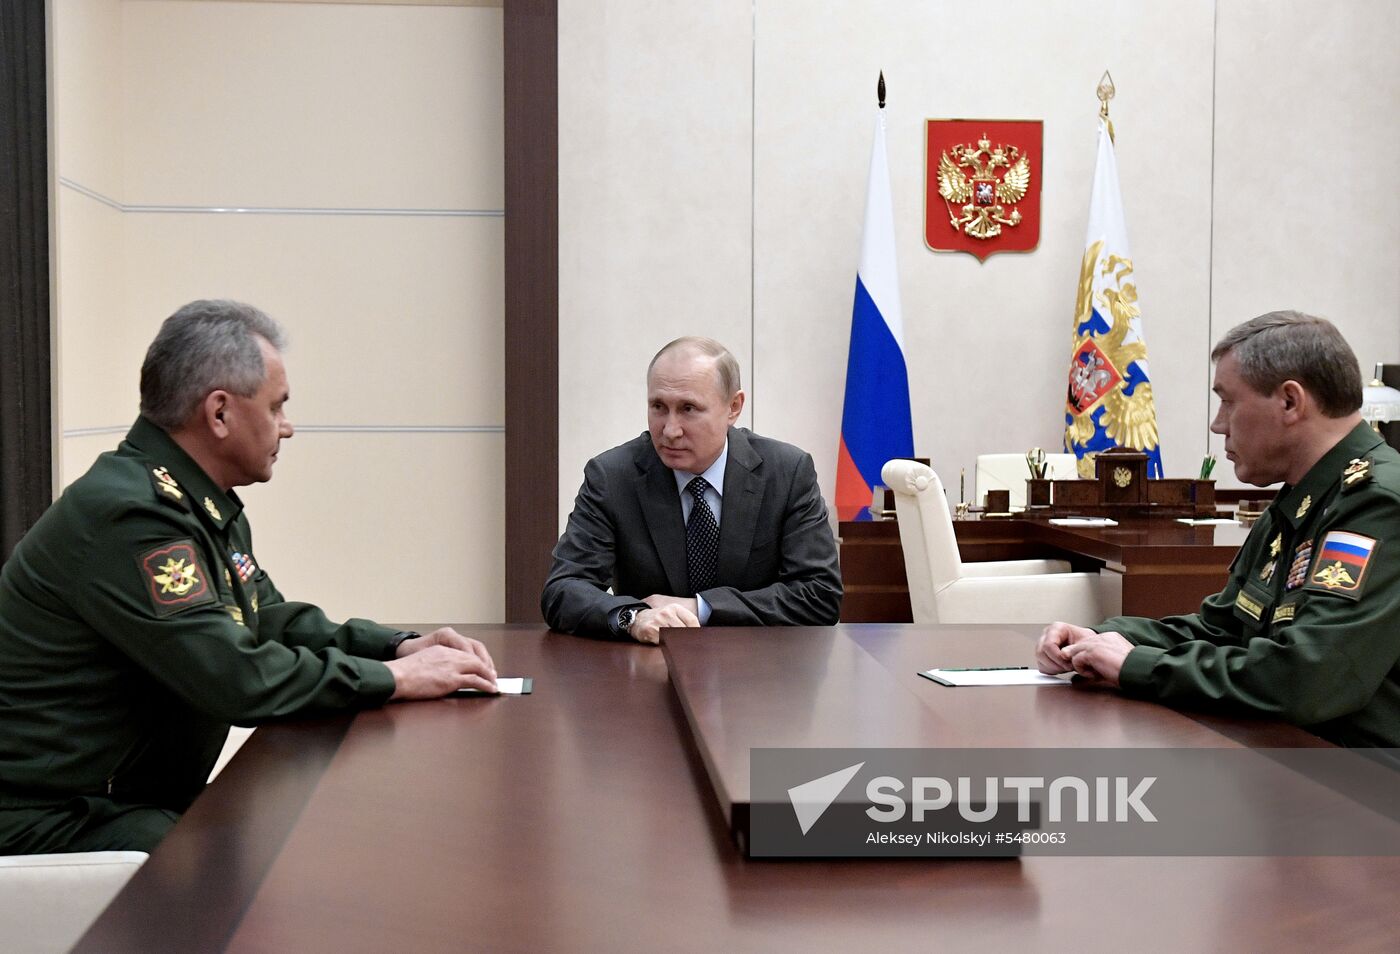 President Vladimir Putin holds meeting with chiefs of Defense Ministry and General Staff of Russian Armed Forces S. Shoigu and V. Gerasimov